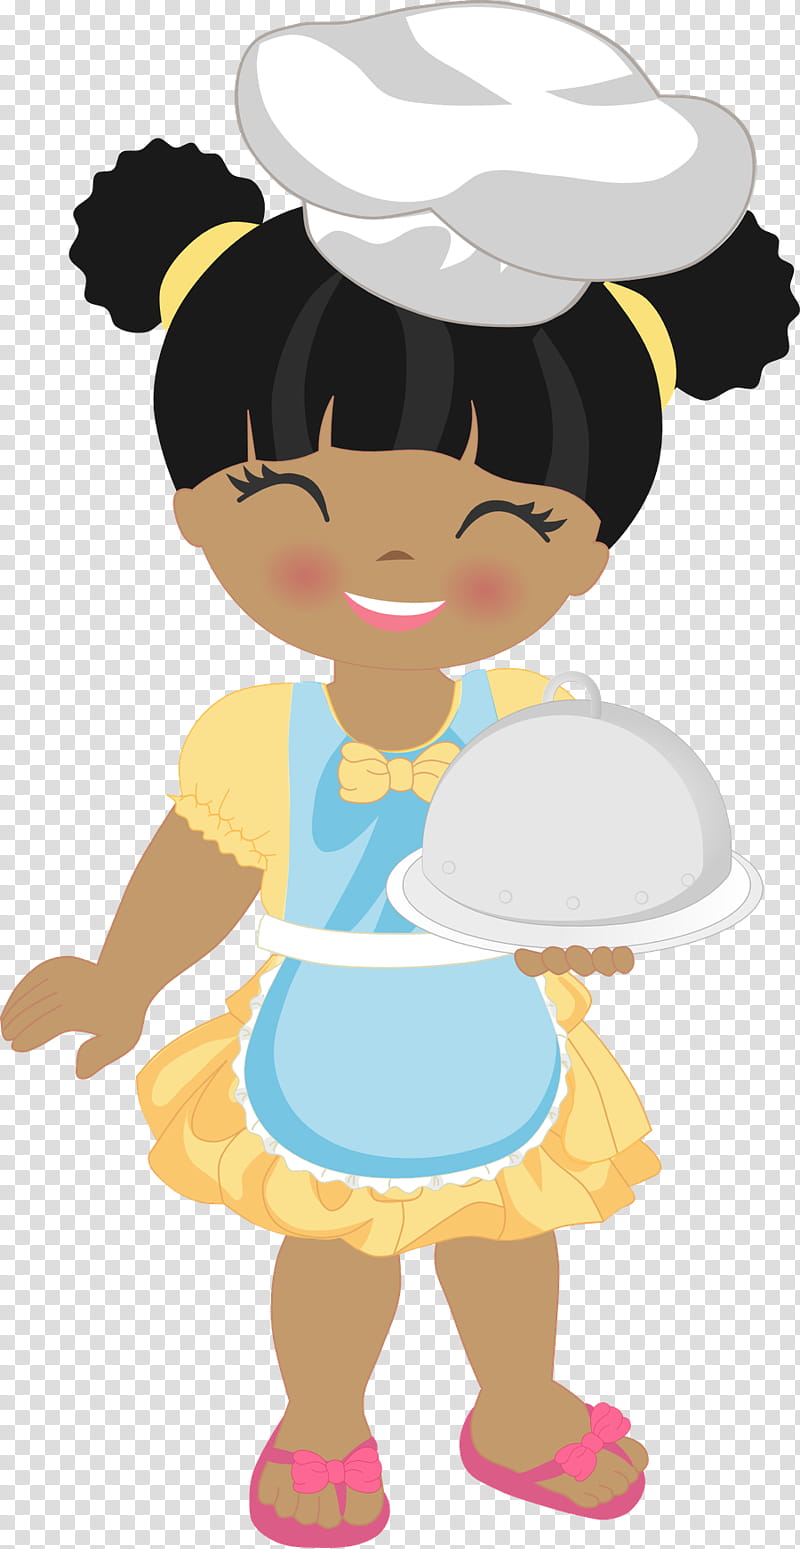 Child, Chef, Paellera, Kitchen, Cooking, Personal Chef, Pastry Chef, Restaurant transparent background PNG clipart